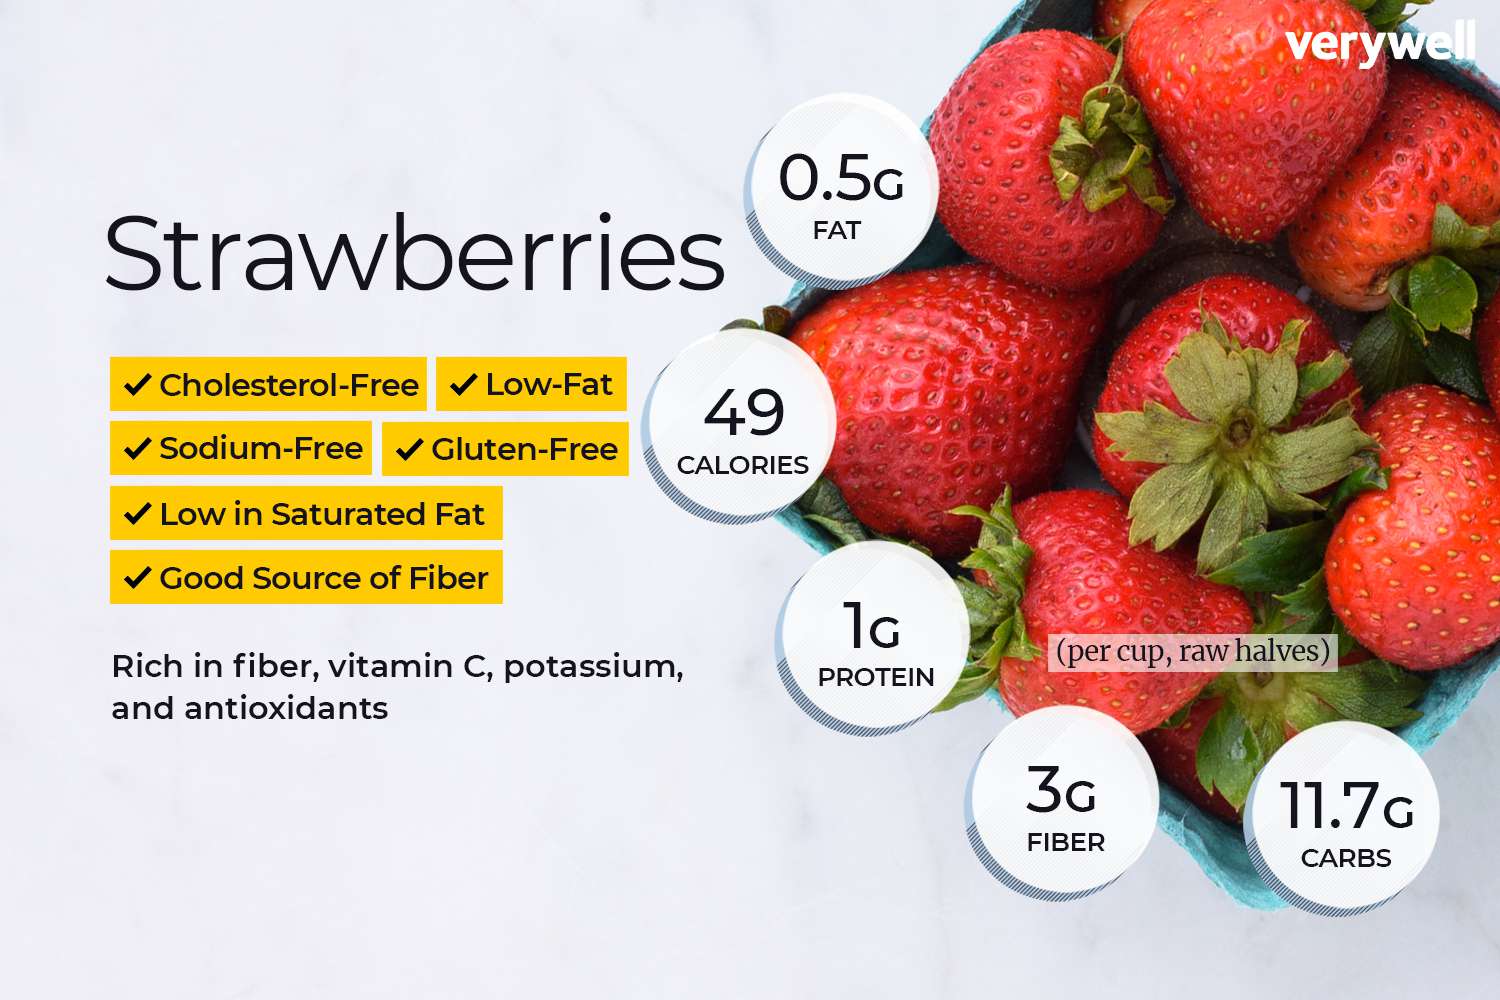 Strawberry Nutrition Facts and Health Benefits - Matta sons